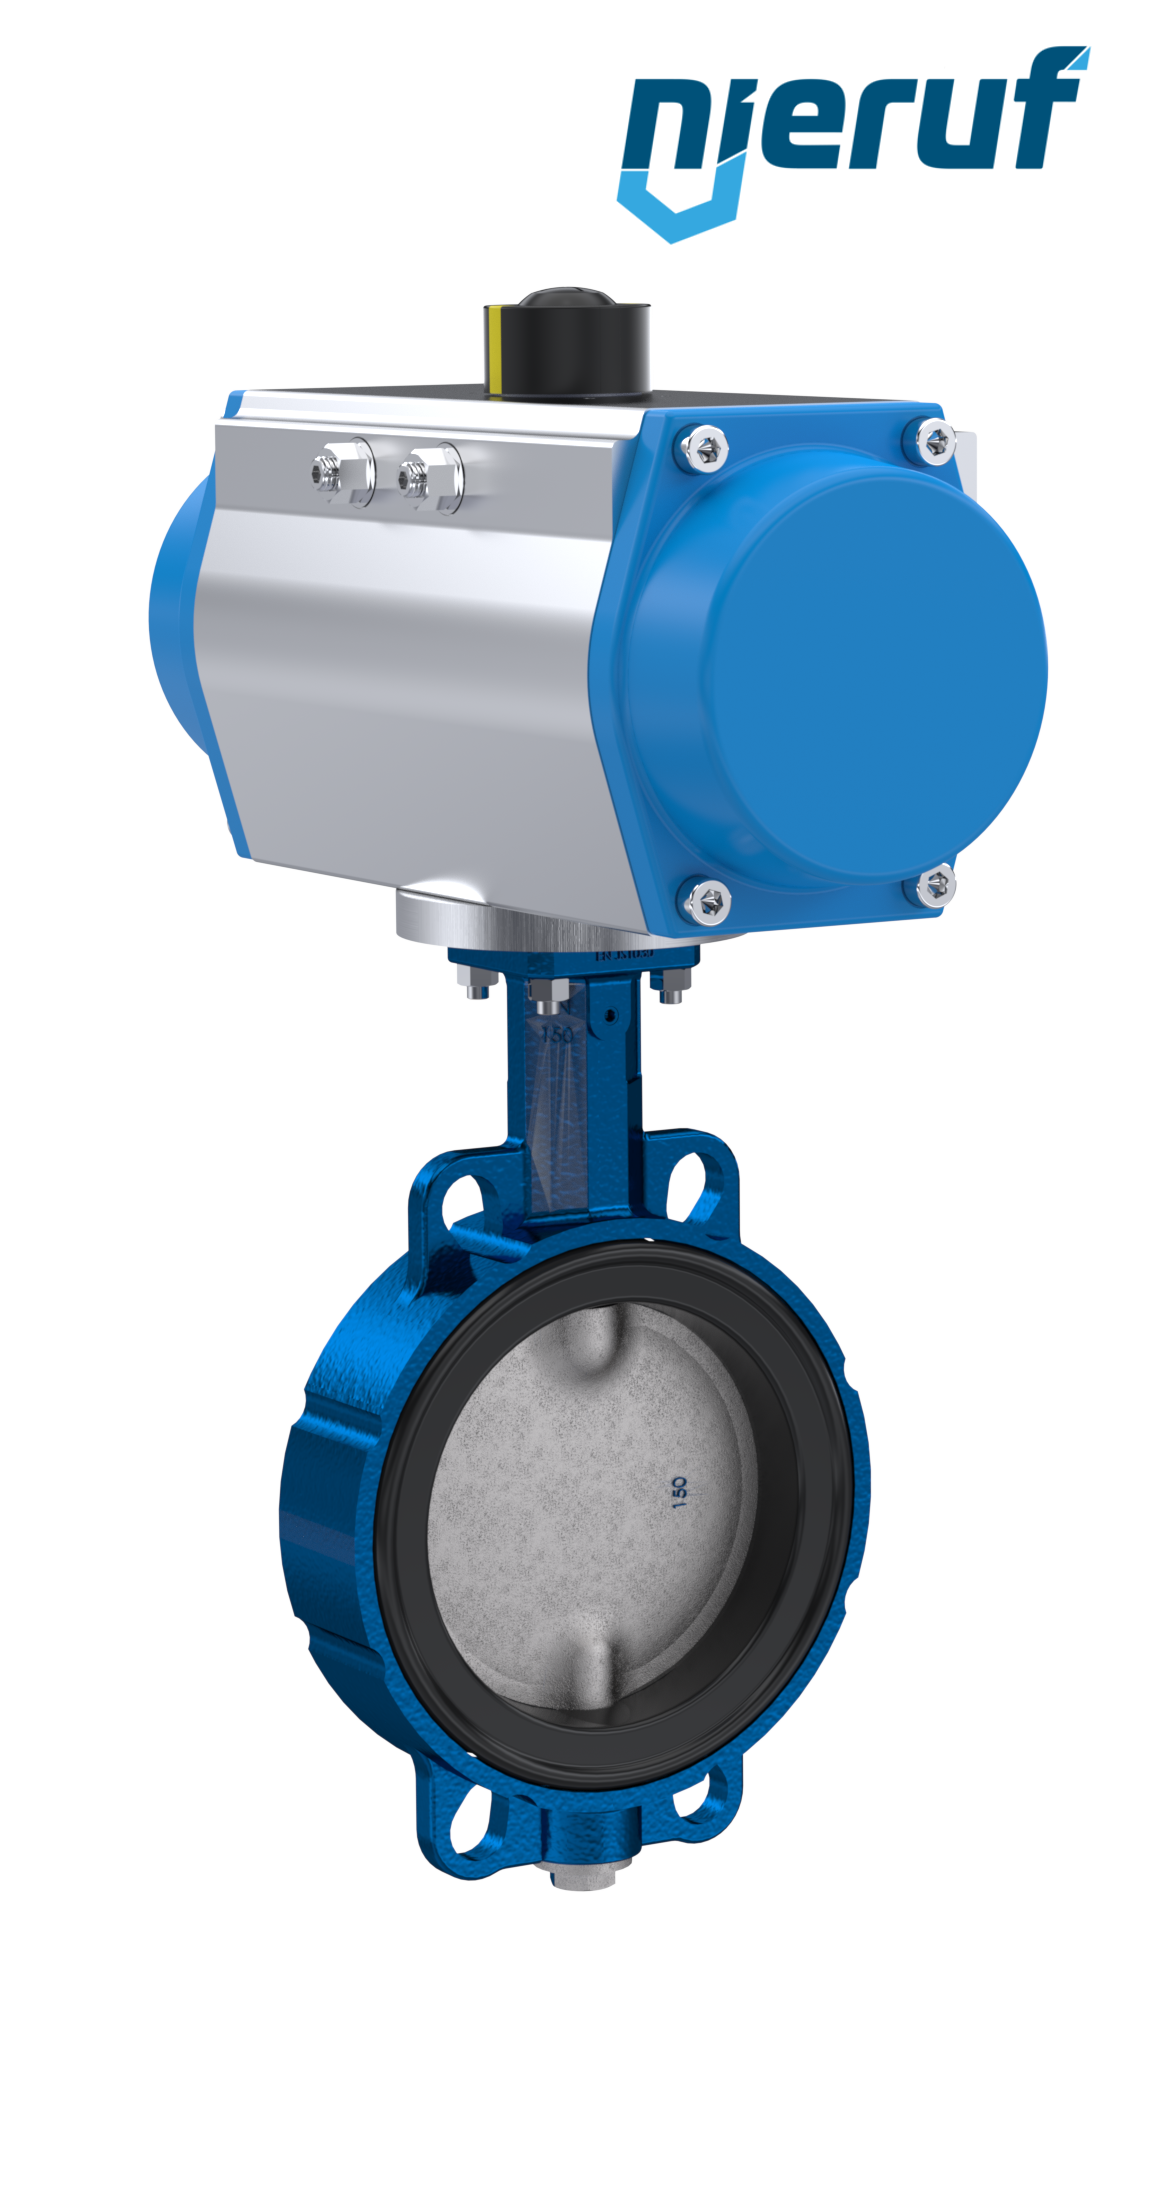 Butterfly valve DN 80 AK01 EPDM DVGW drinking water, WRAS, ACS, W270 pneumatic actuator single acting